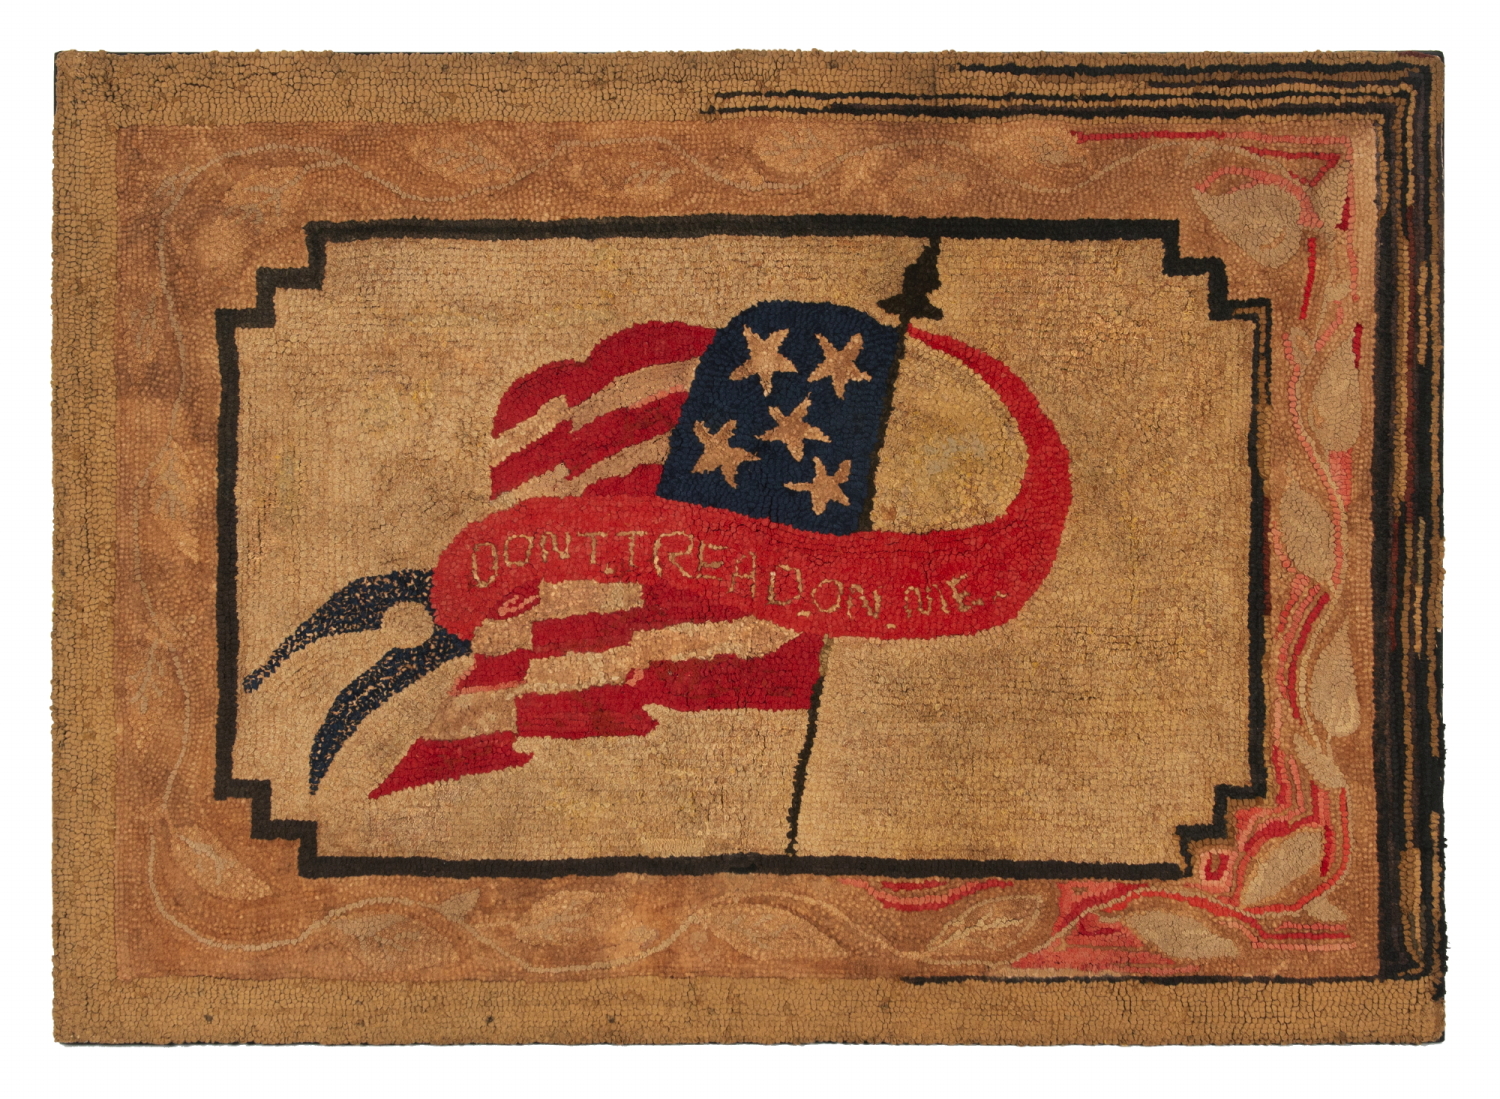 WOOL HOOKED RUG WITH AN AMERICAN FLAG AND A FORKED TAIL STREAMER BEARING WITH “DON’T TREAD ON ME” SLOGAN; THE 5 STAR COUNT, IF PURPOSEFUL, WOULD CELEBRATE THE NUMBER OF STATES THAT AFFORDED WOMEN THE RIGHT TO VOTE; circa 1880-1910